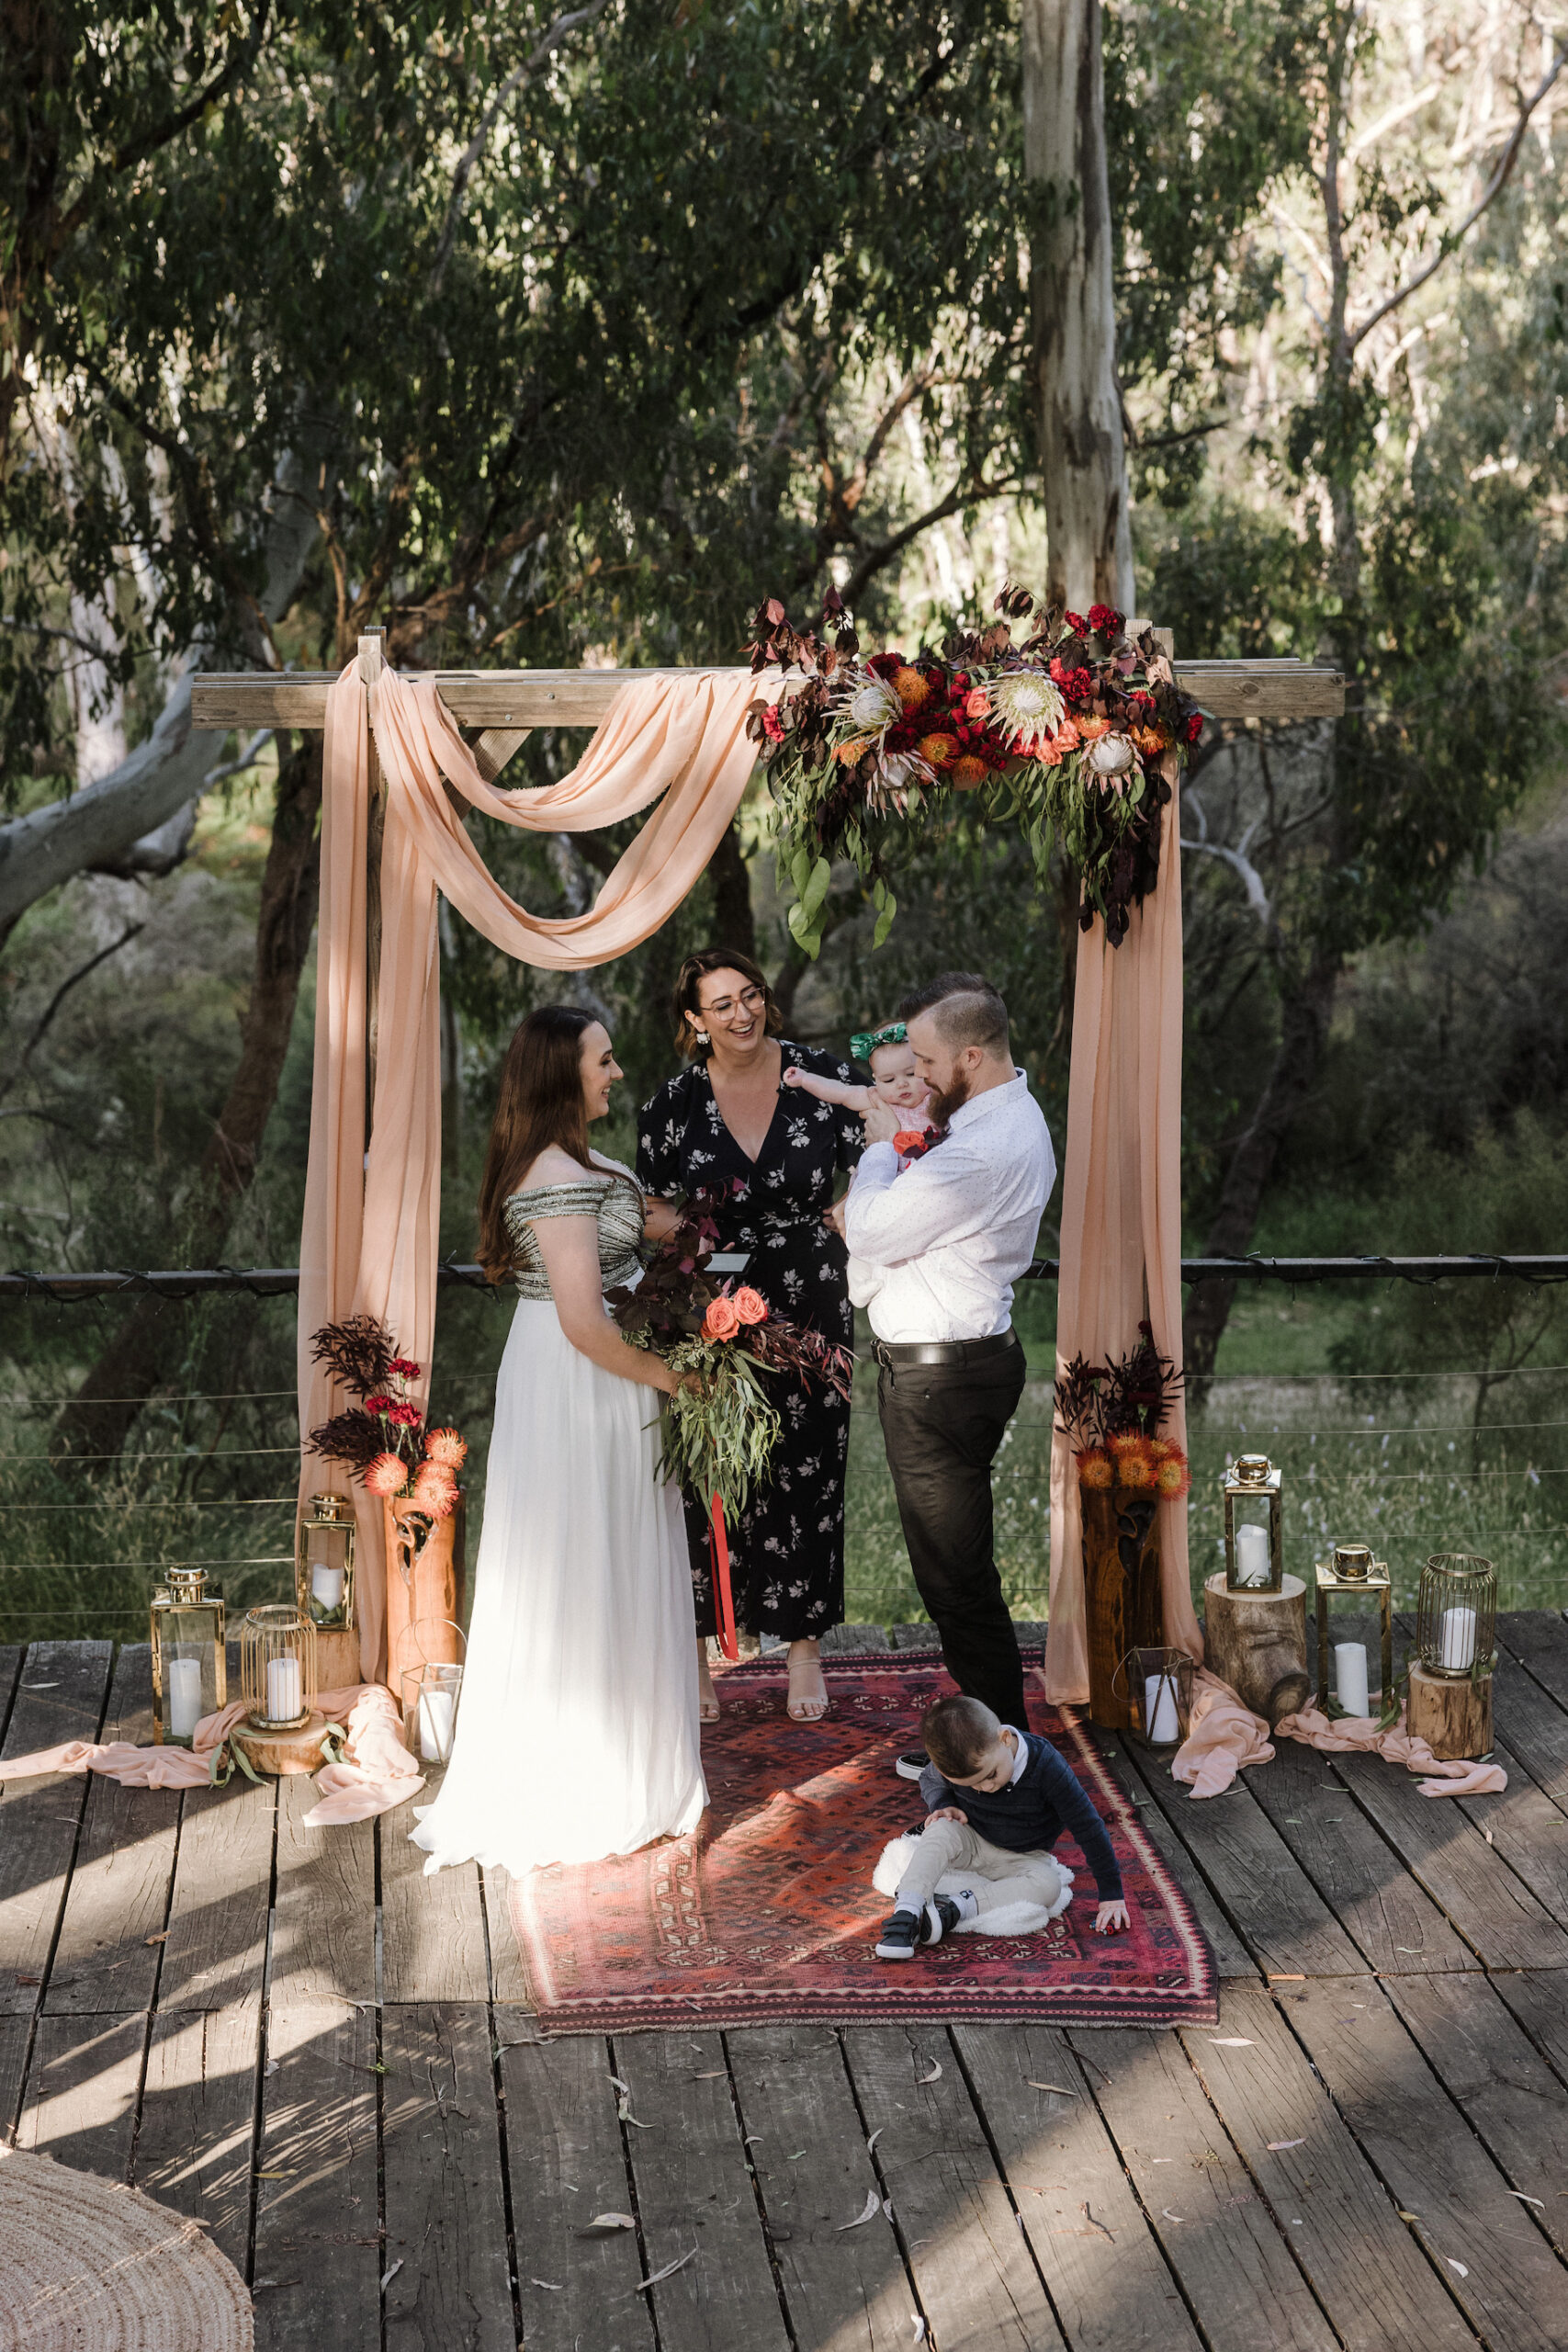 Sinclair's Gully Winery, Wedding Venue in the Adelaide Hills offering flexibility for catering, beverages and a casual woodland style feel only 20 minutes from the Adelaide CBD.